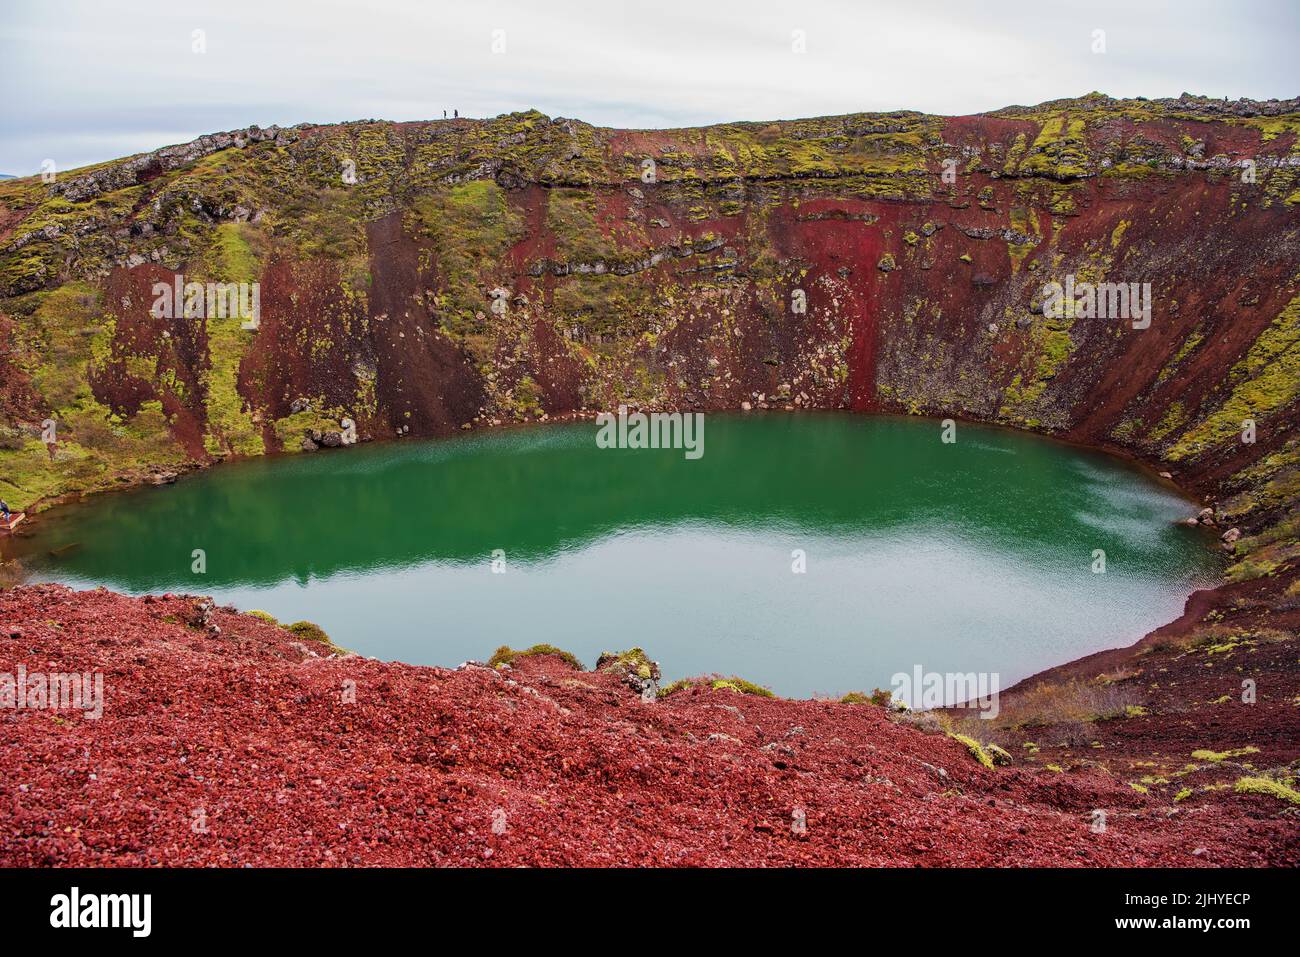 Kerið, also known as Kerith or Kerid, is a volcanic crater lake located in the Grímsnes area in south Iceland, along the Golden Circle. Stock Photo